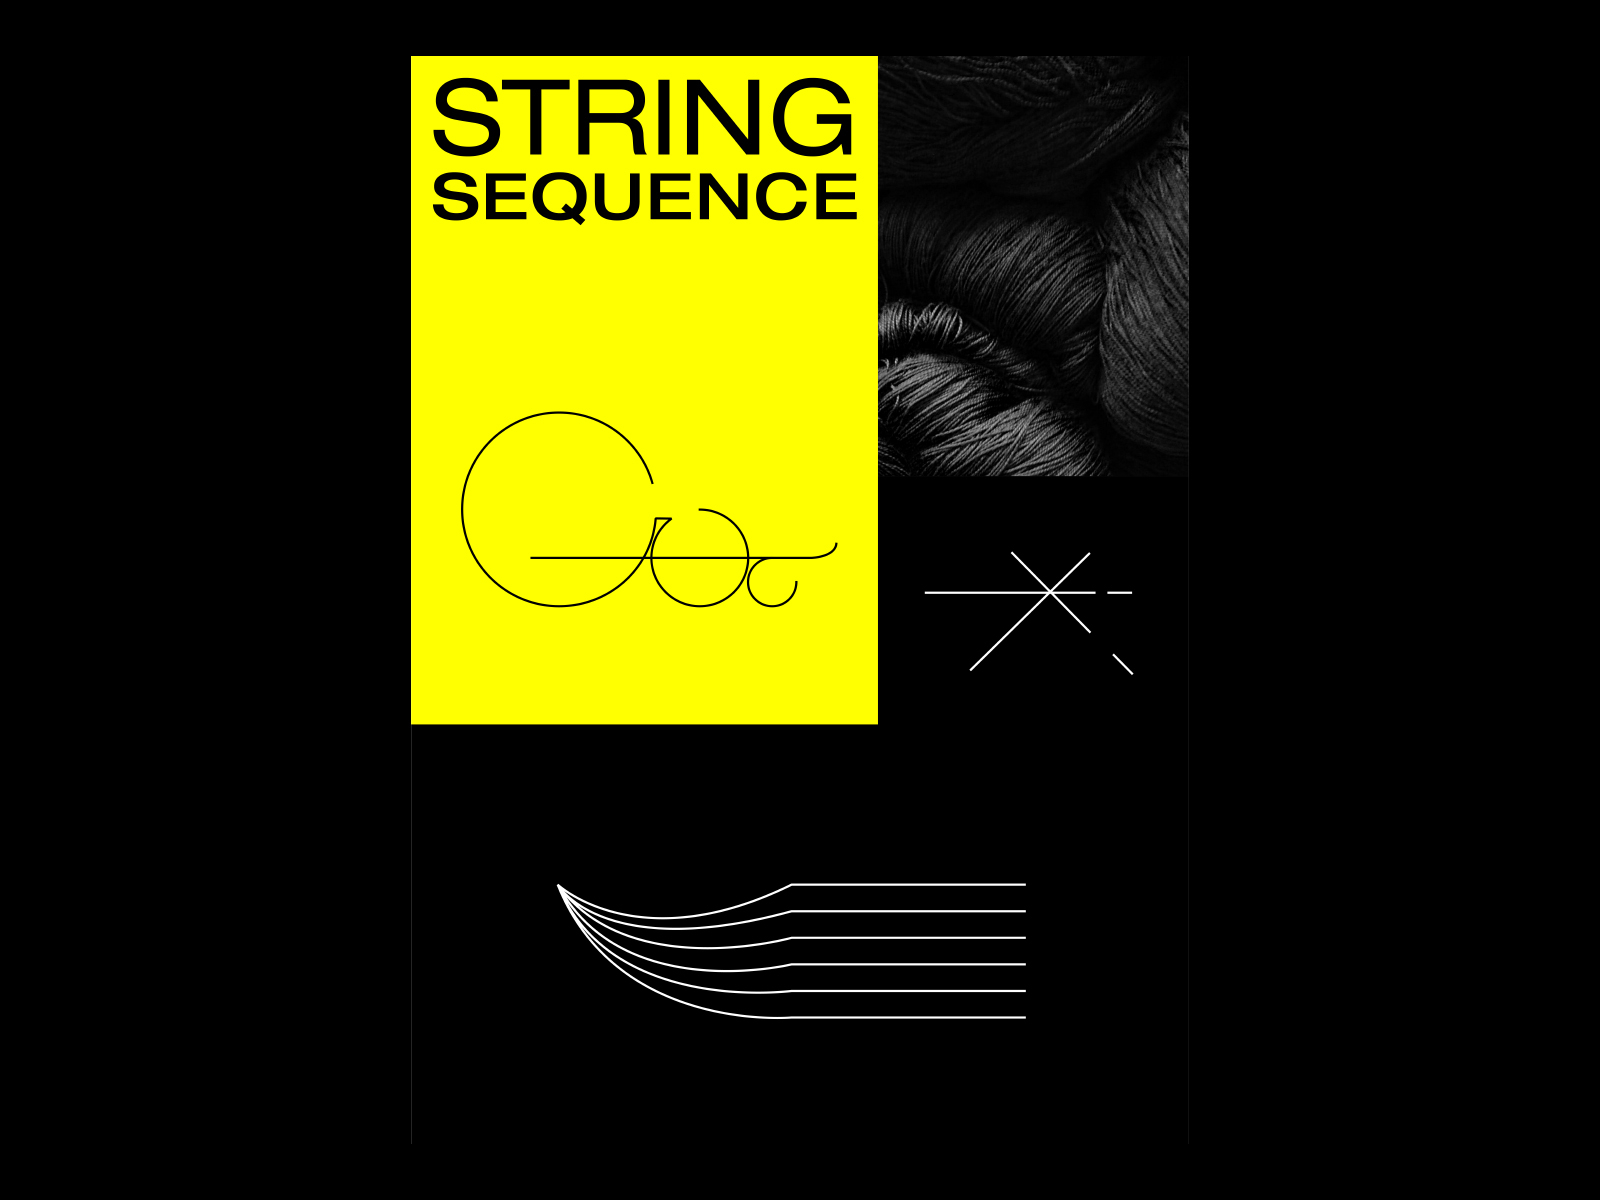 custom-letter-shapes-string-sequence-by-george-mironidis-on-dribbble